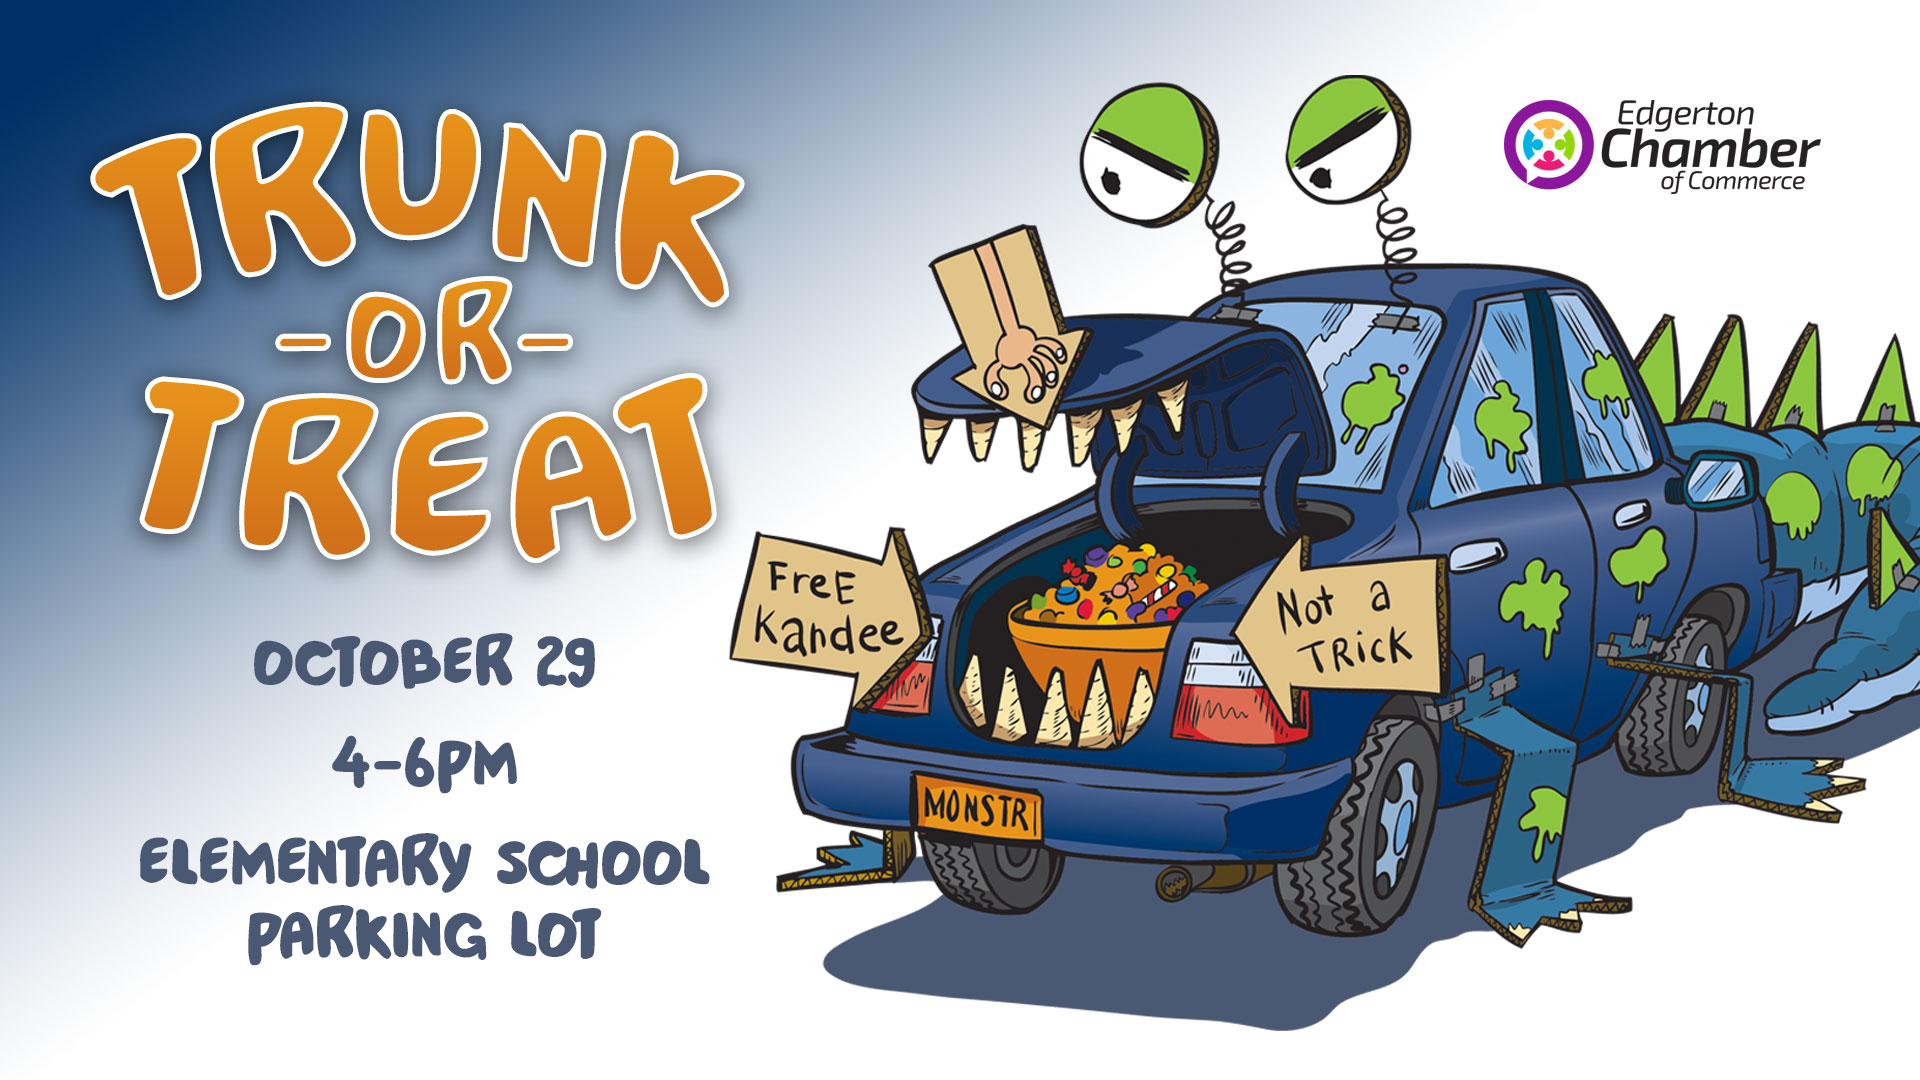 Trunk or Treat coming October 29 – Edgerton Chamber of Commerce